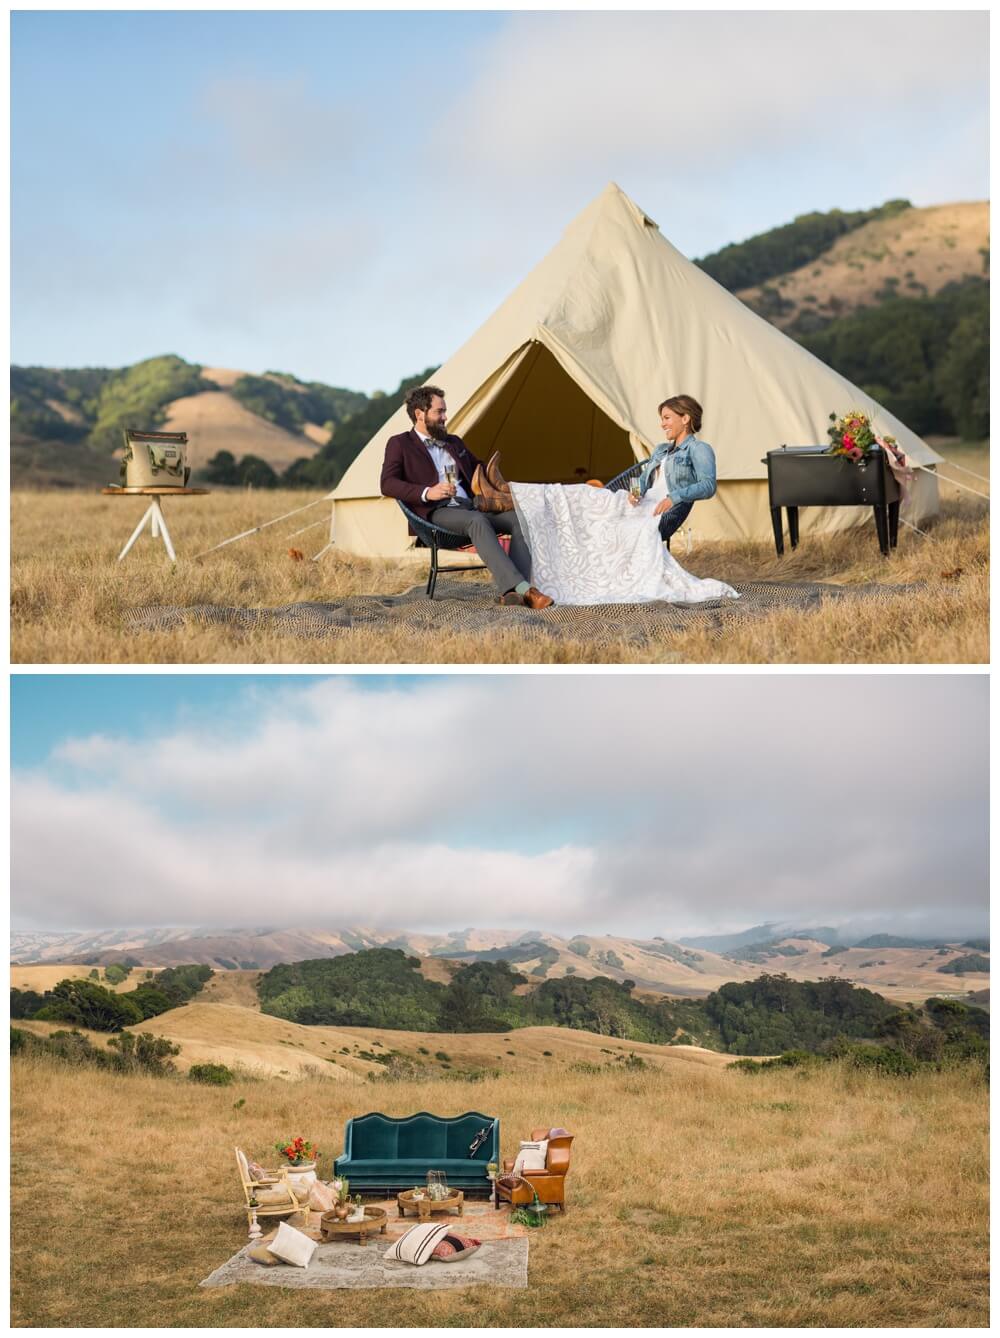 Bride and groom relaxing at a romantic bohemian wedding in the hills of Sonoma County with a tent set up in the background